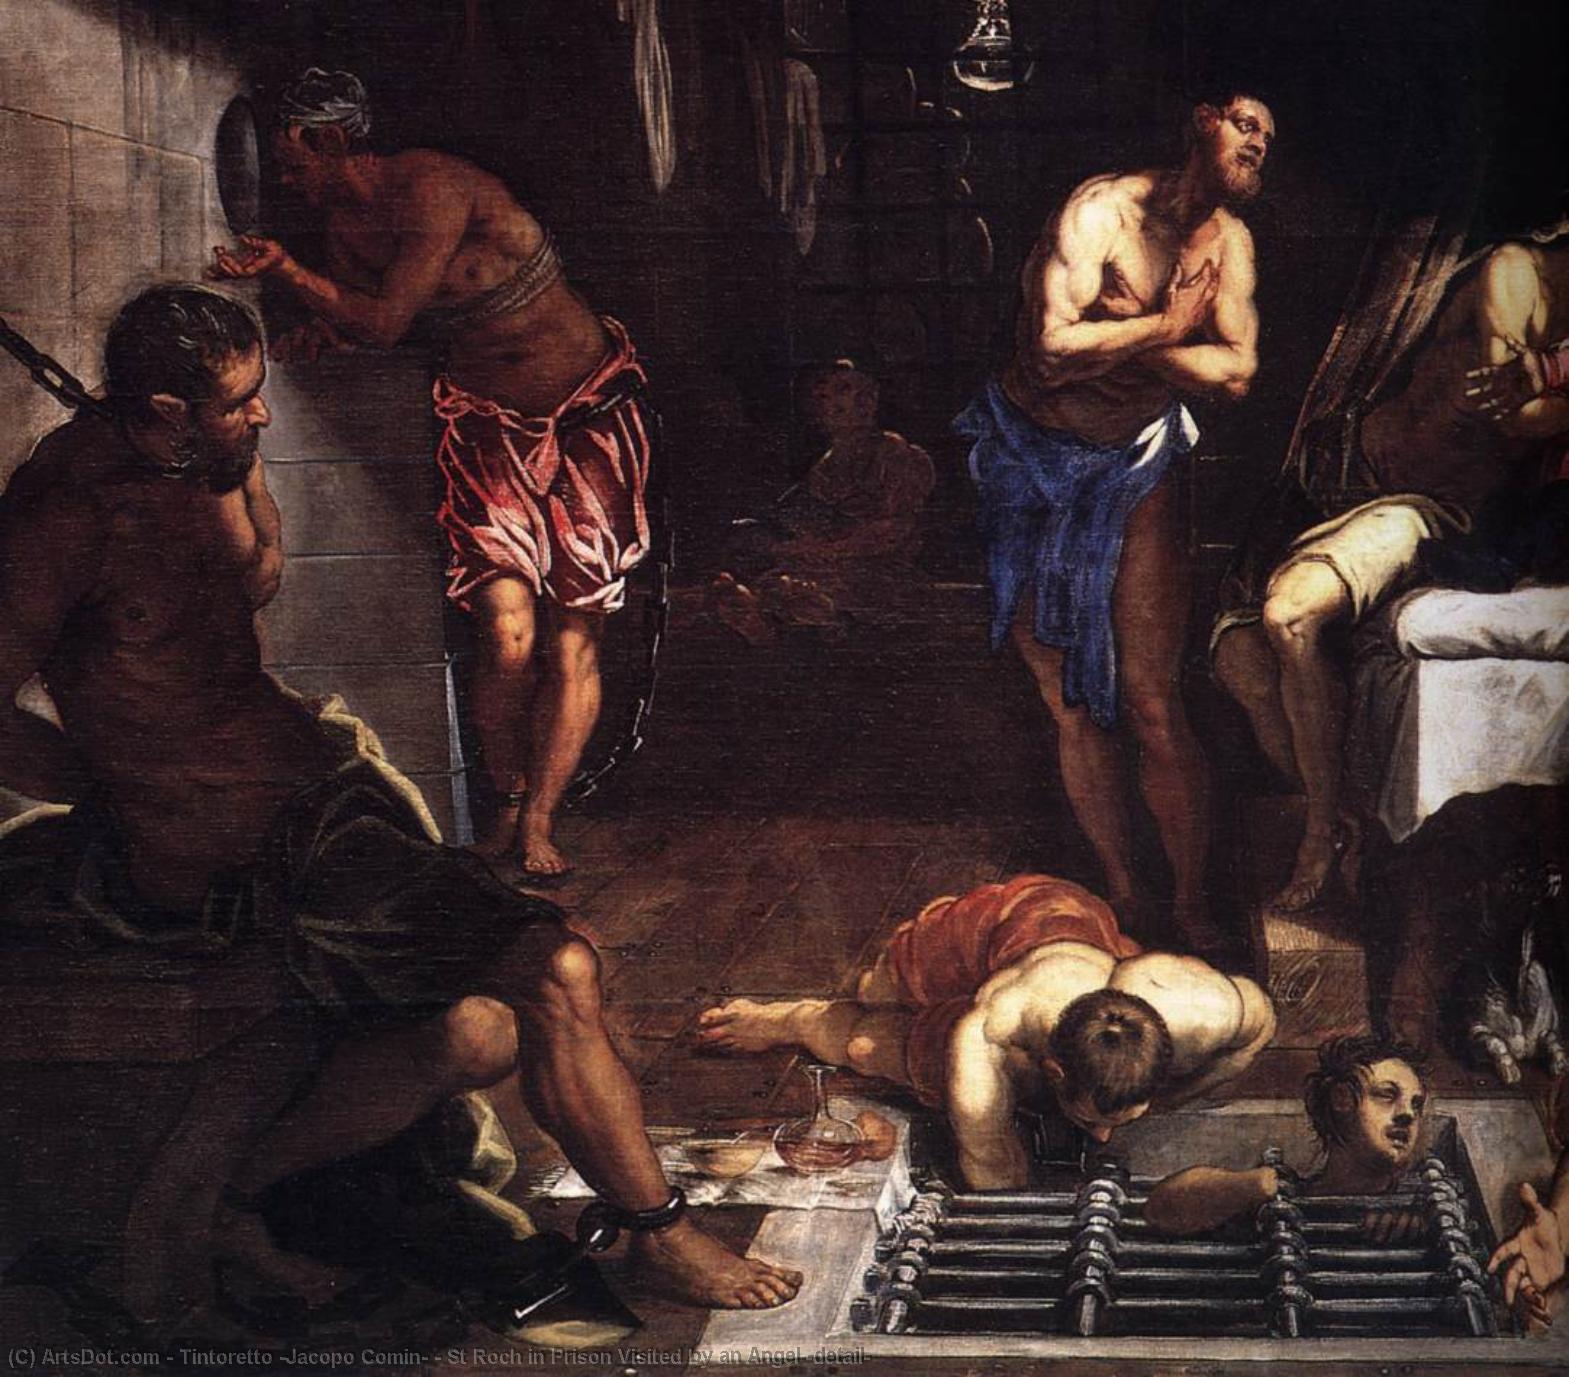 WikiOO.org - Encyclopedia of Fine Arts - Lukisan, Artwork Tintoretto (Jacopo Comin) - St Roch in Prison Visited by an Angel (detail)